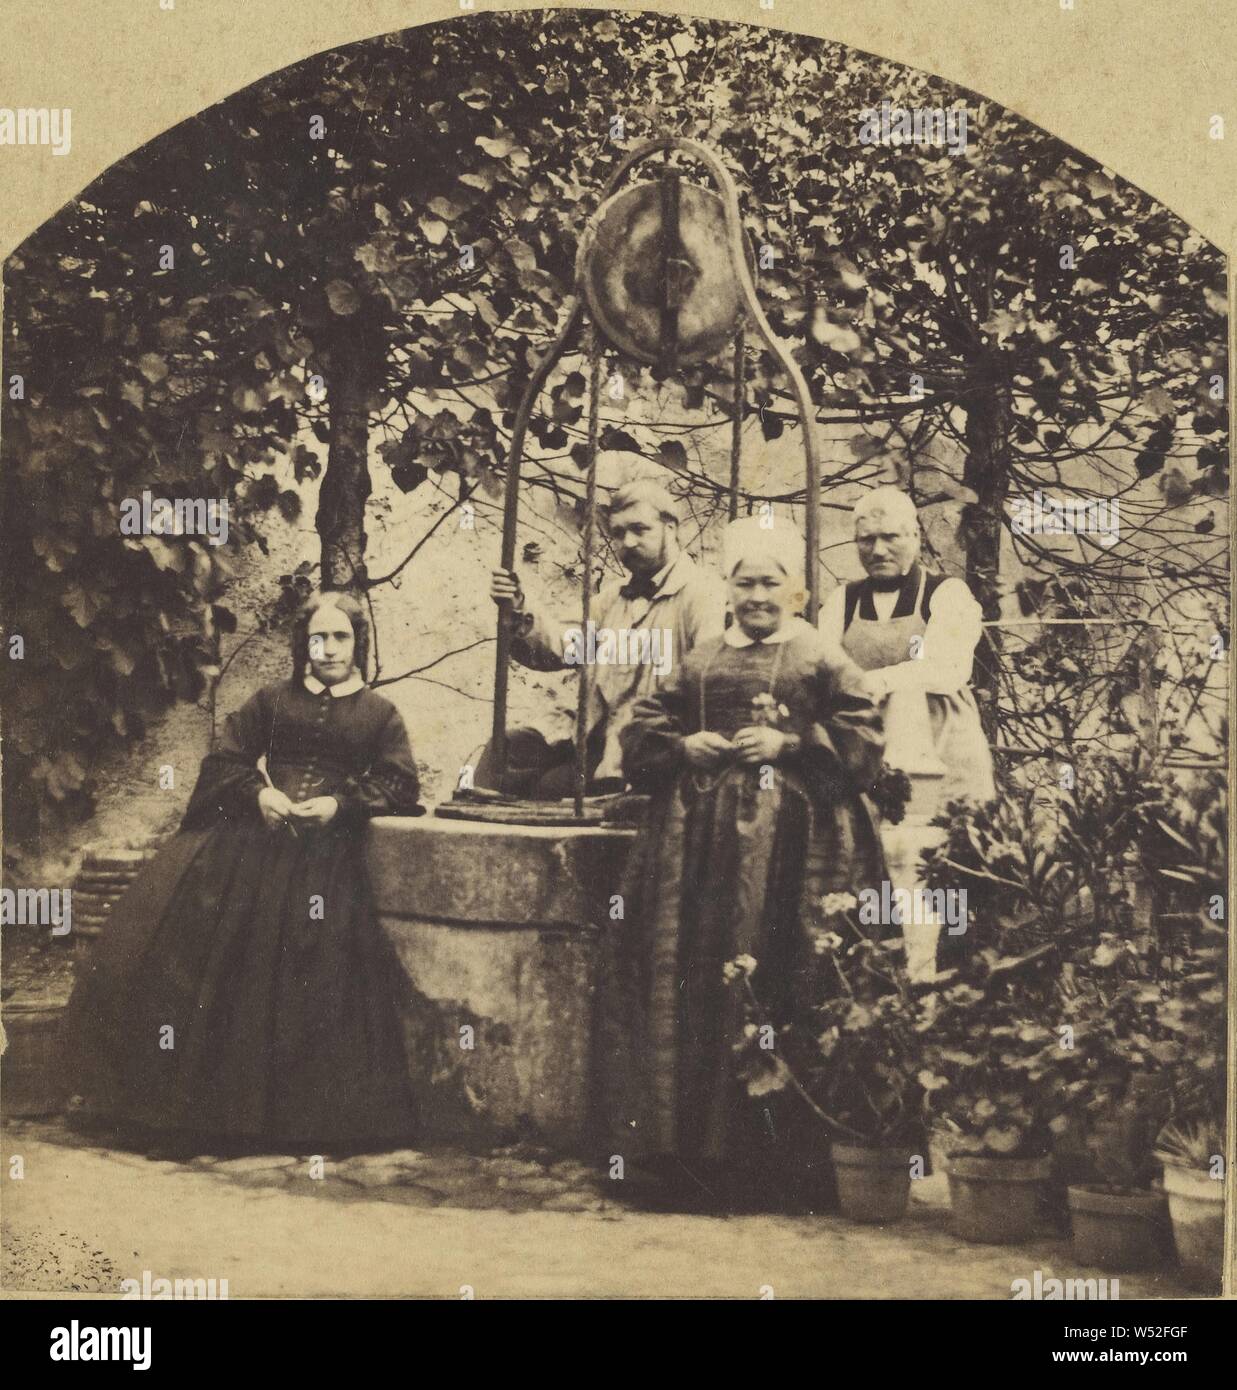 Young French couple and two elders standing in their garden near a well, Henry Van Der Helle (French, active 1870s), about 1877, Albumen silver print Stock Photo